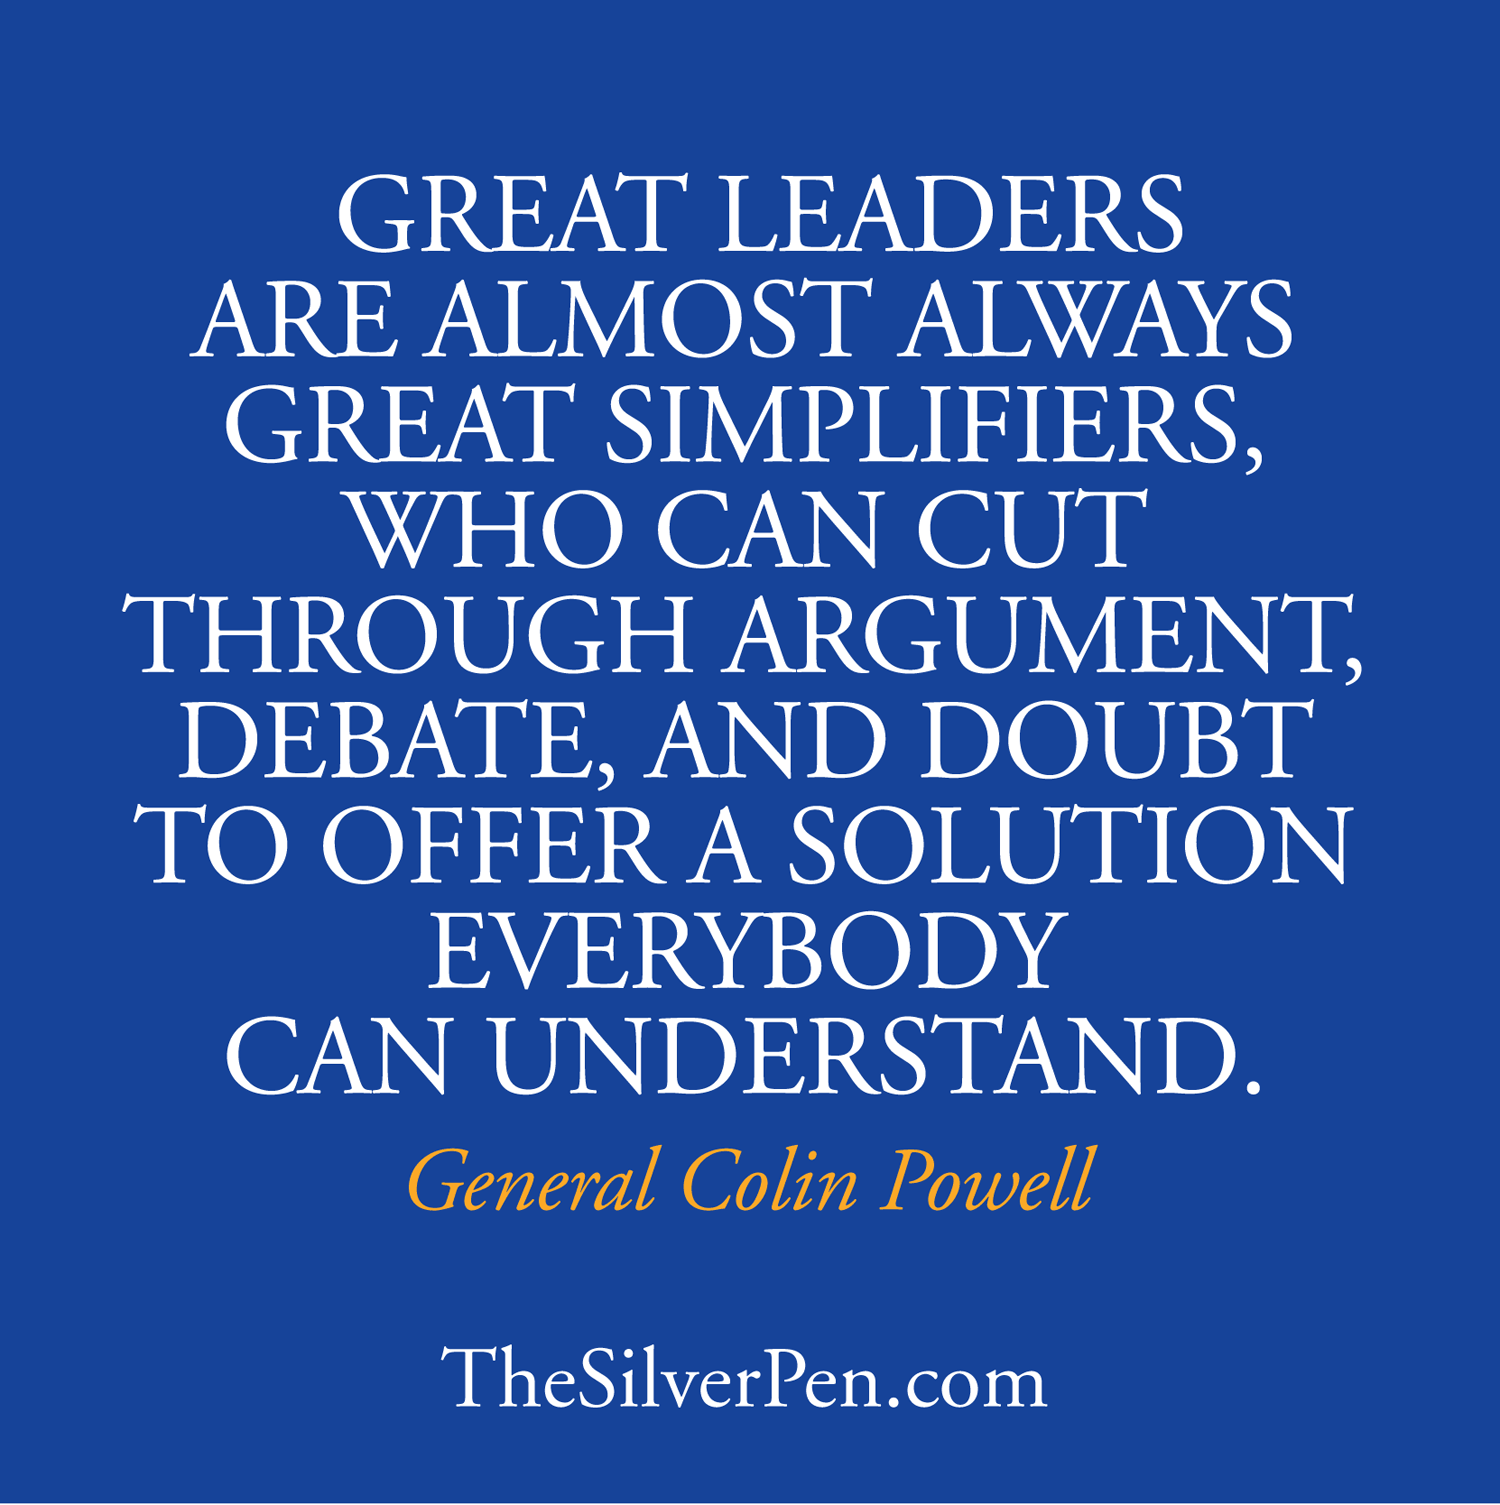 Great leaders are almost always great simplifiers, who can cut through argument, debate and doubt, to offer a solution everybody can understand. Colin Powell